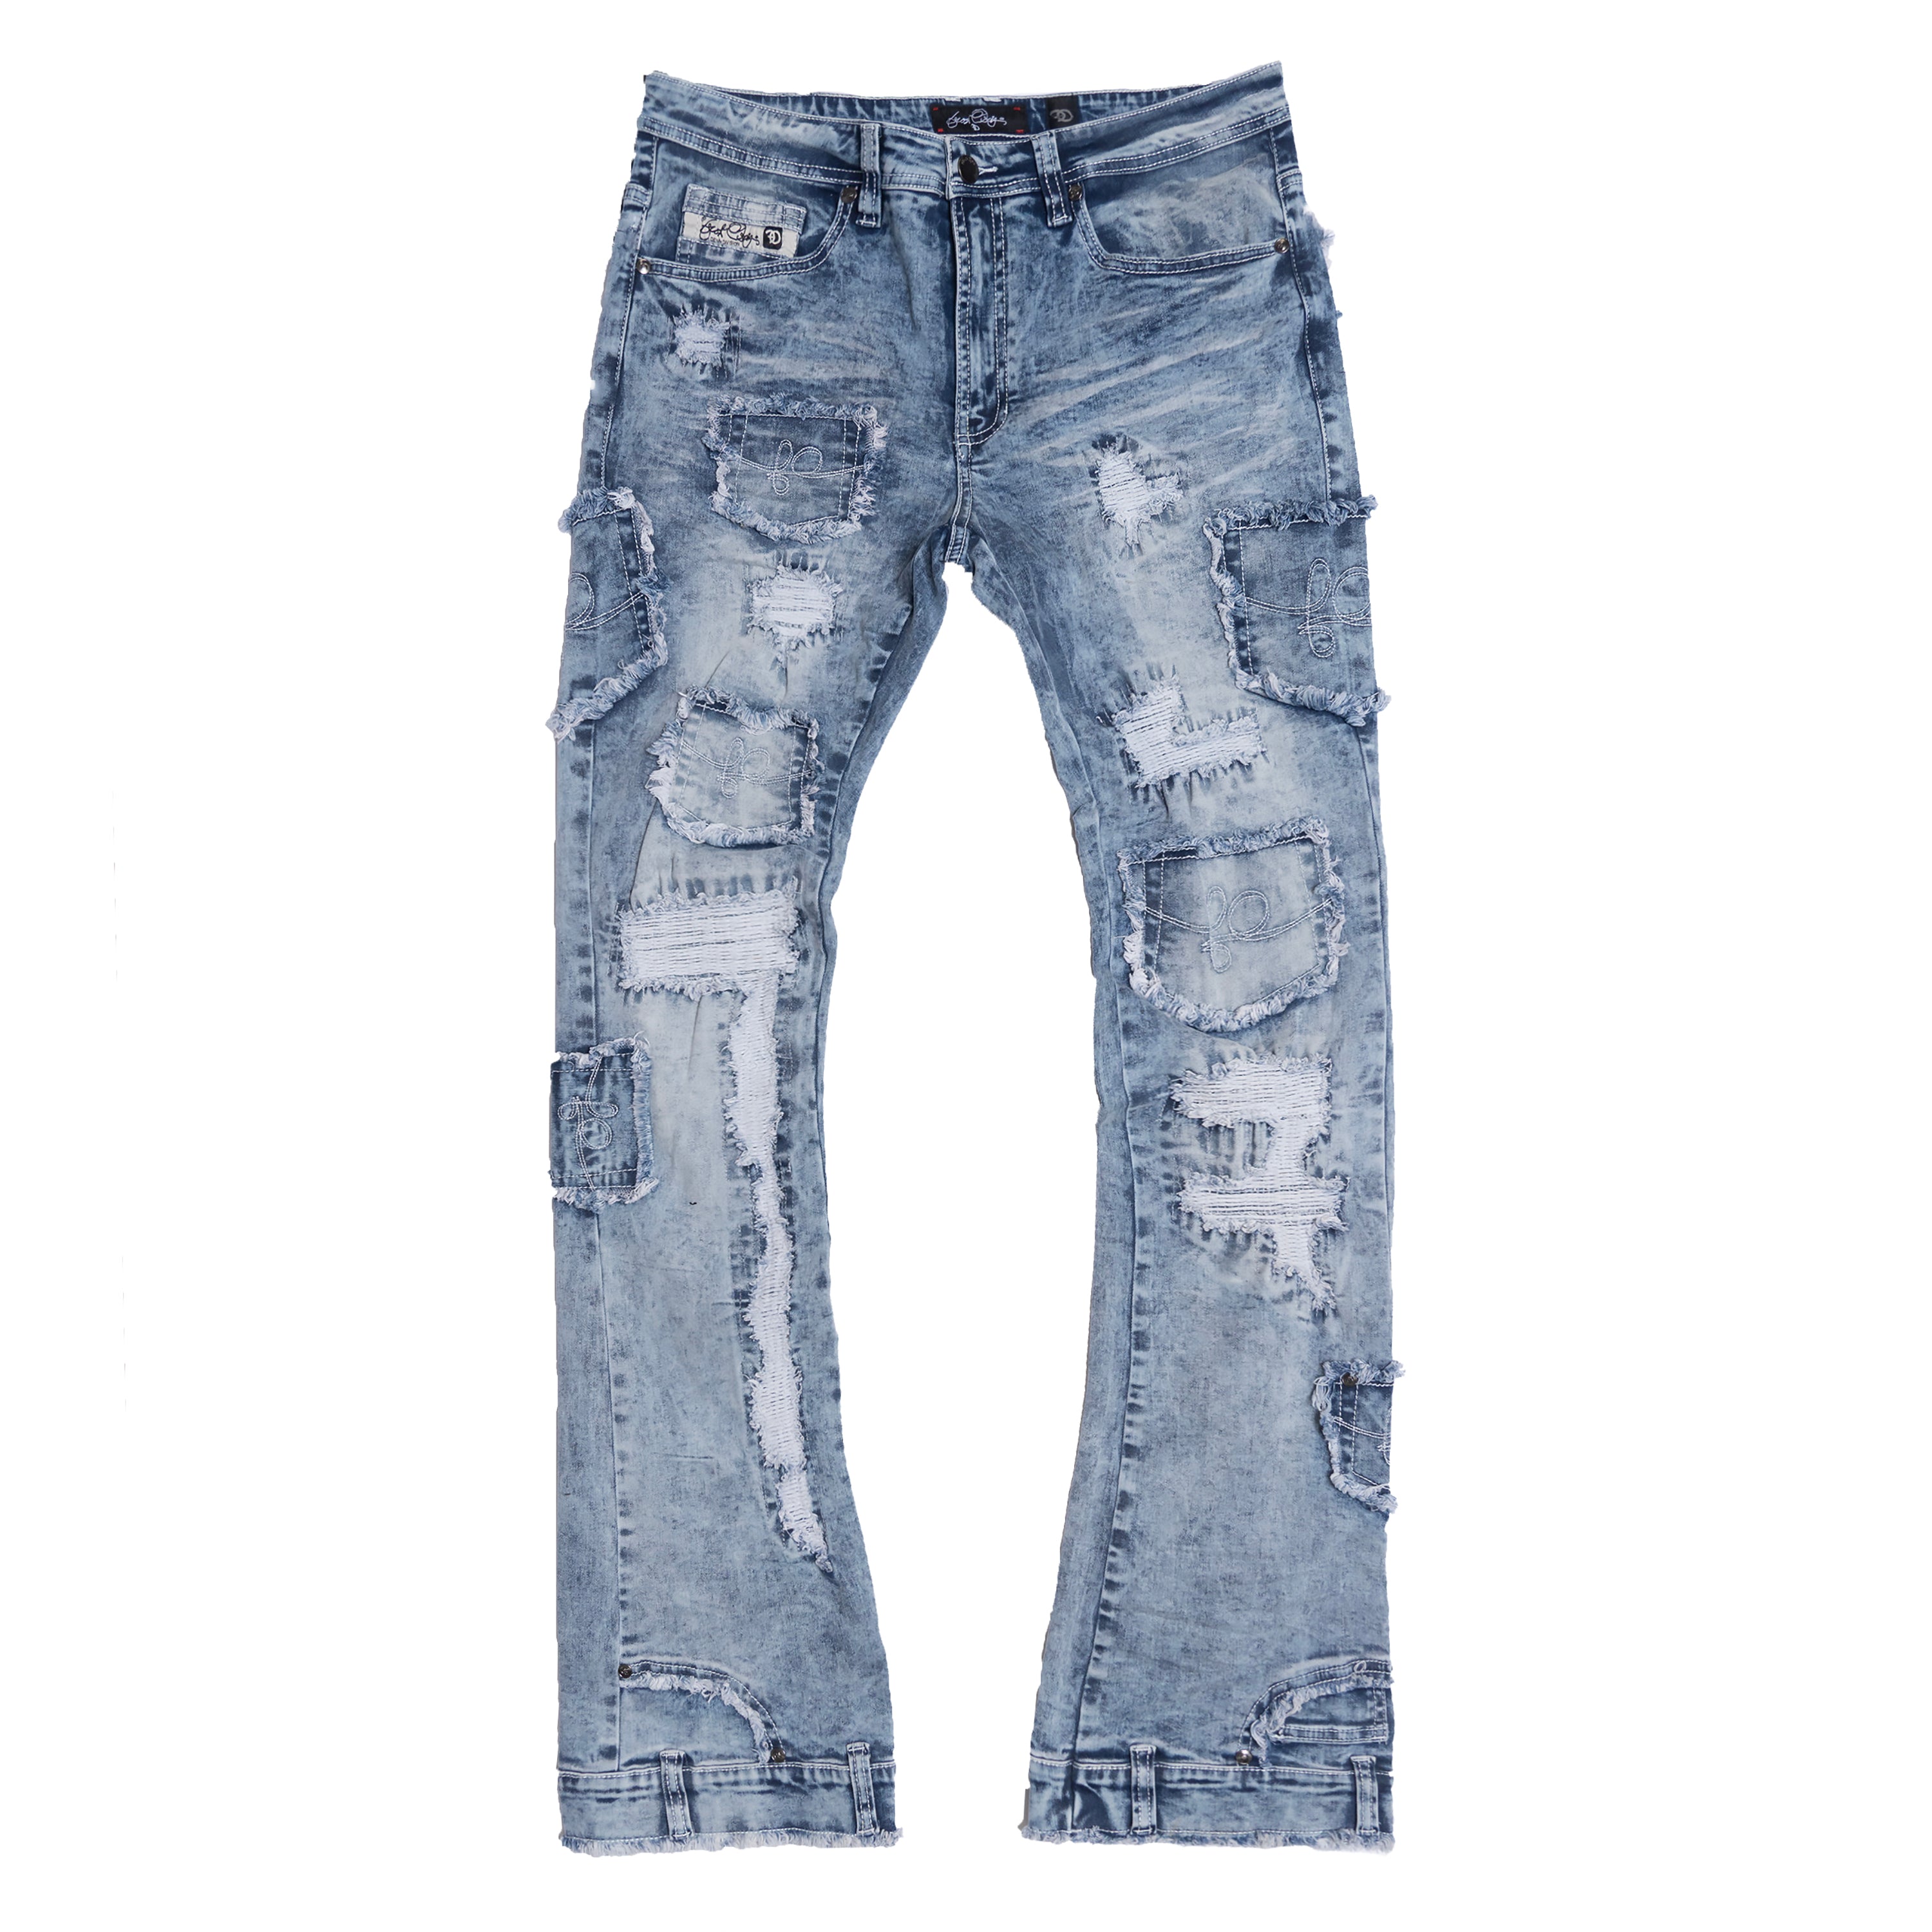 F1721 Rackade Stacked Jeans - Light Wash